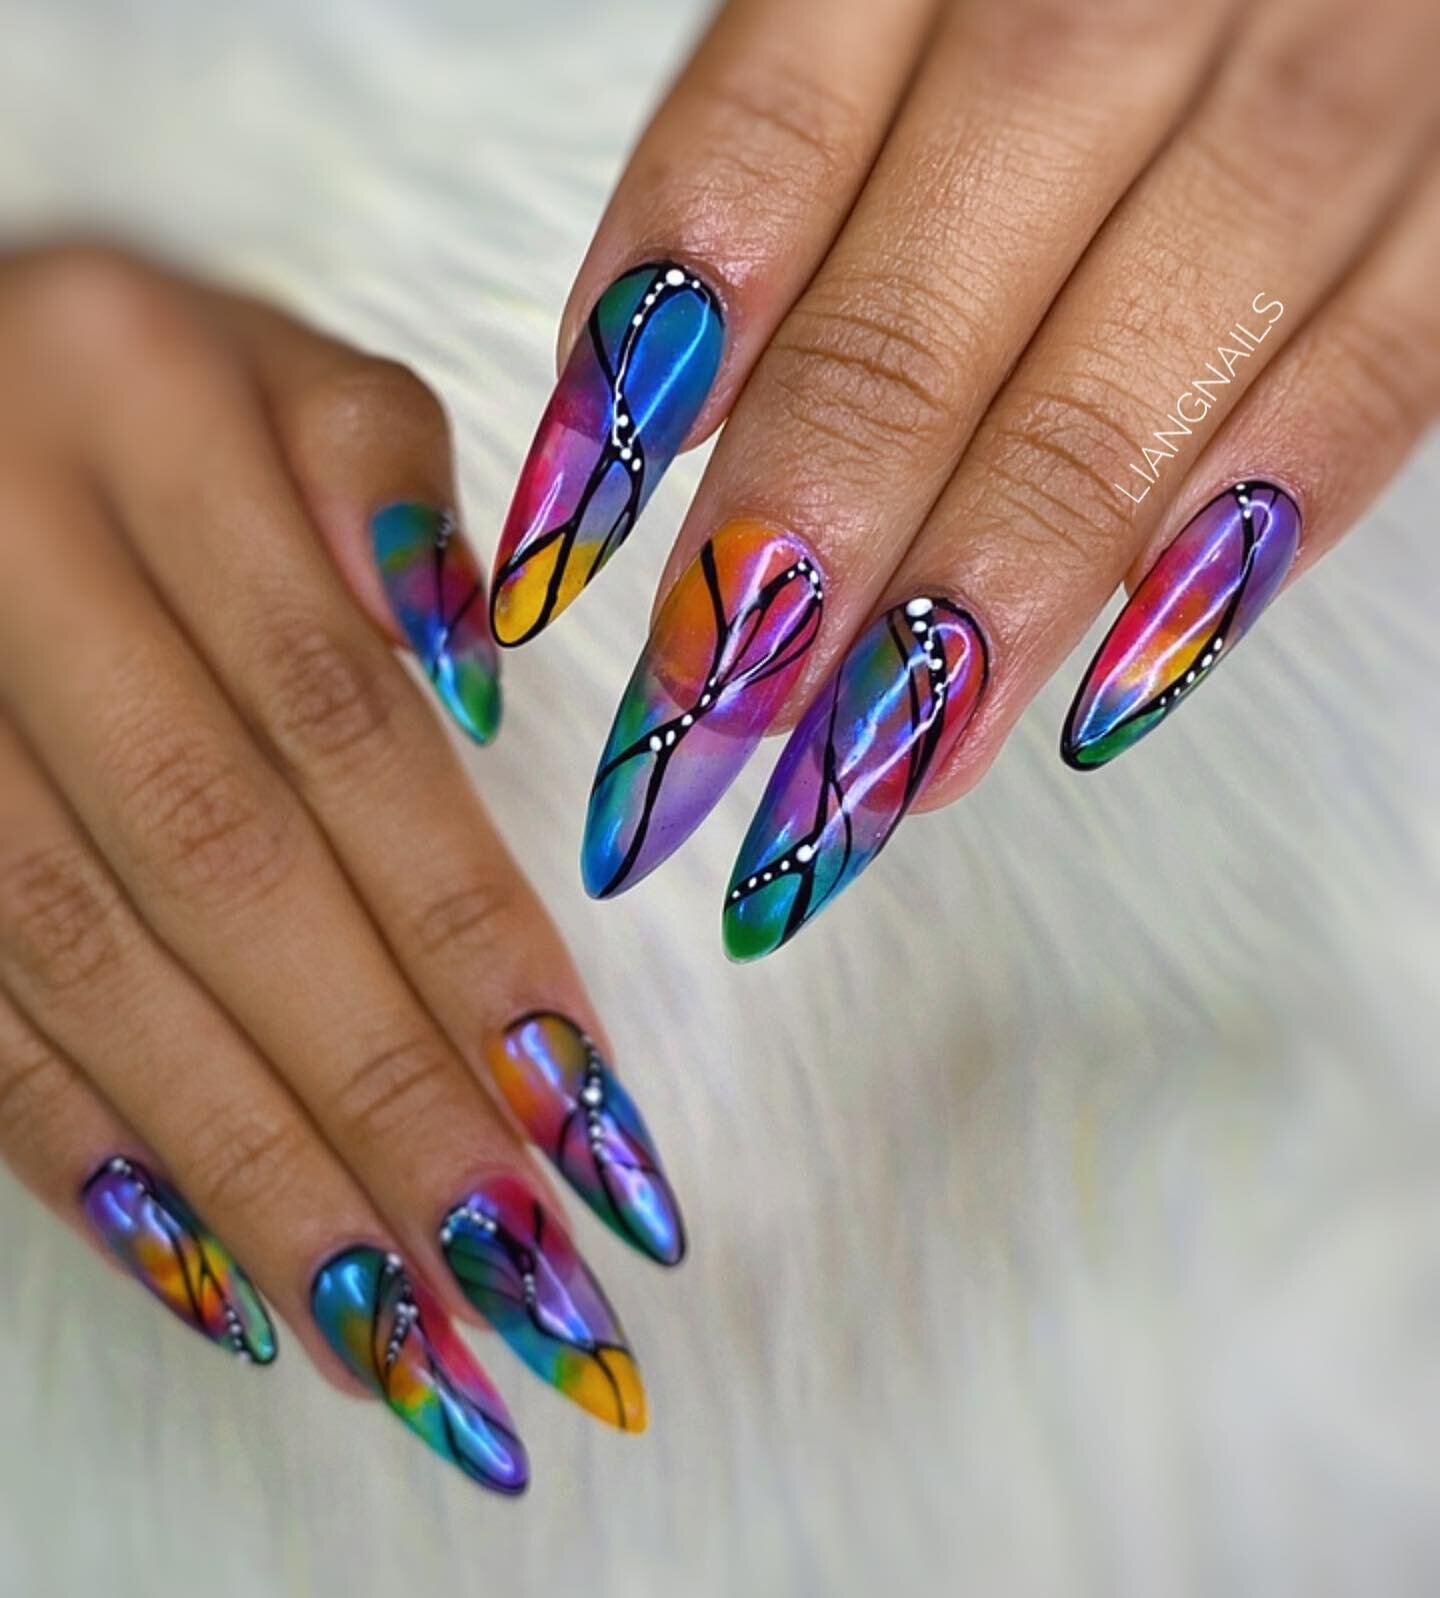 Rainbow jelly stained glass ombr&eacute; 🌈😍

Swipe ⬅️ to see them fly 🦋
Inspo @nelza_dun